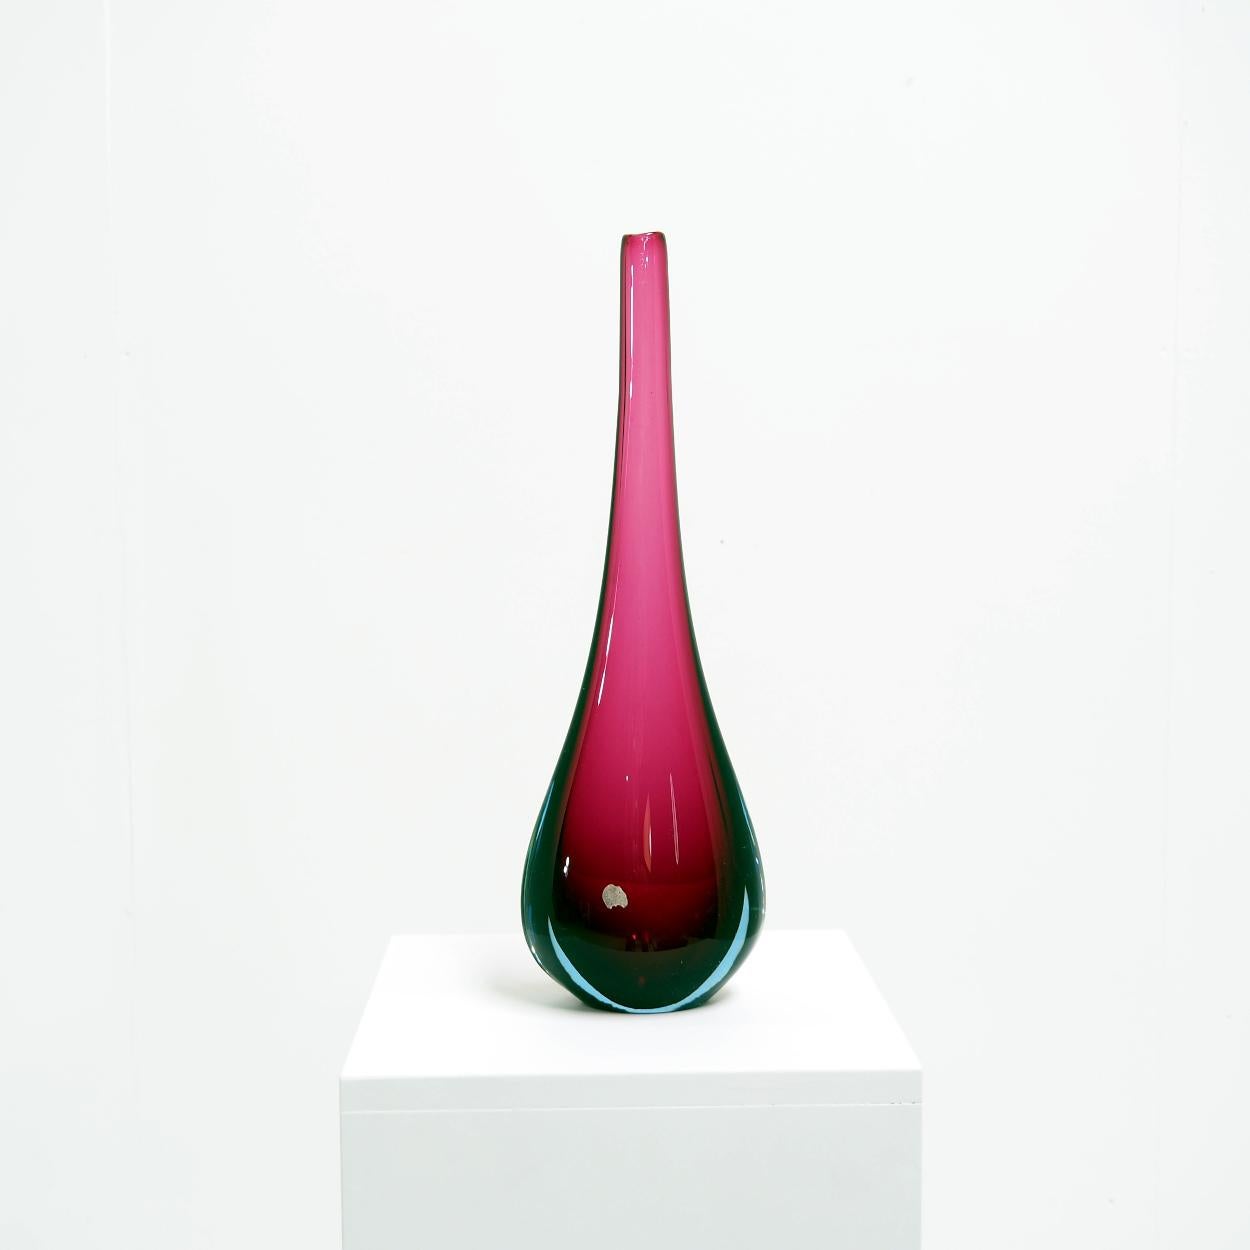 This type of vase is called a ‘Sommerso’ vase because of the technique used. The Italian word ‘Sommerso’ (meaning submerged) refers to the technique where two or three layers of coloured glass are put together without mixing the glass. The colours